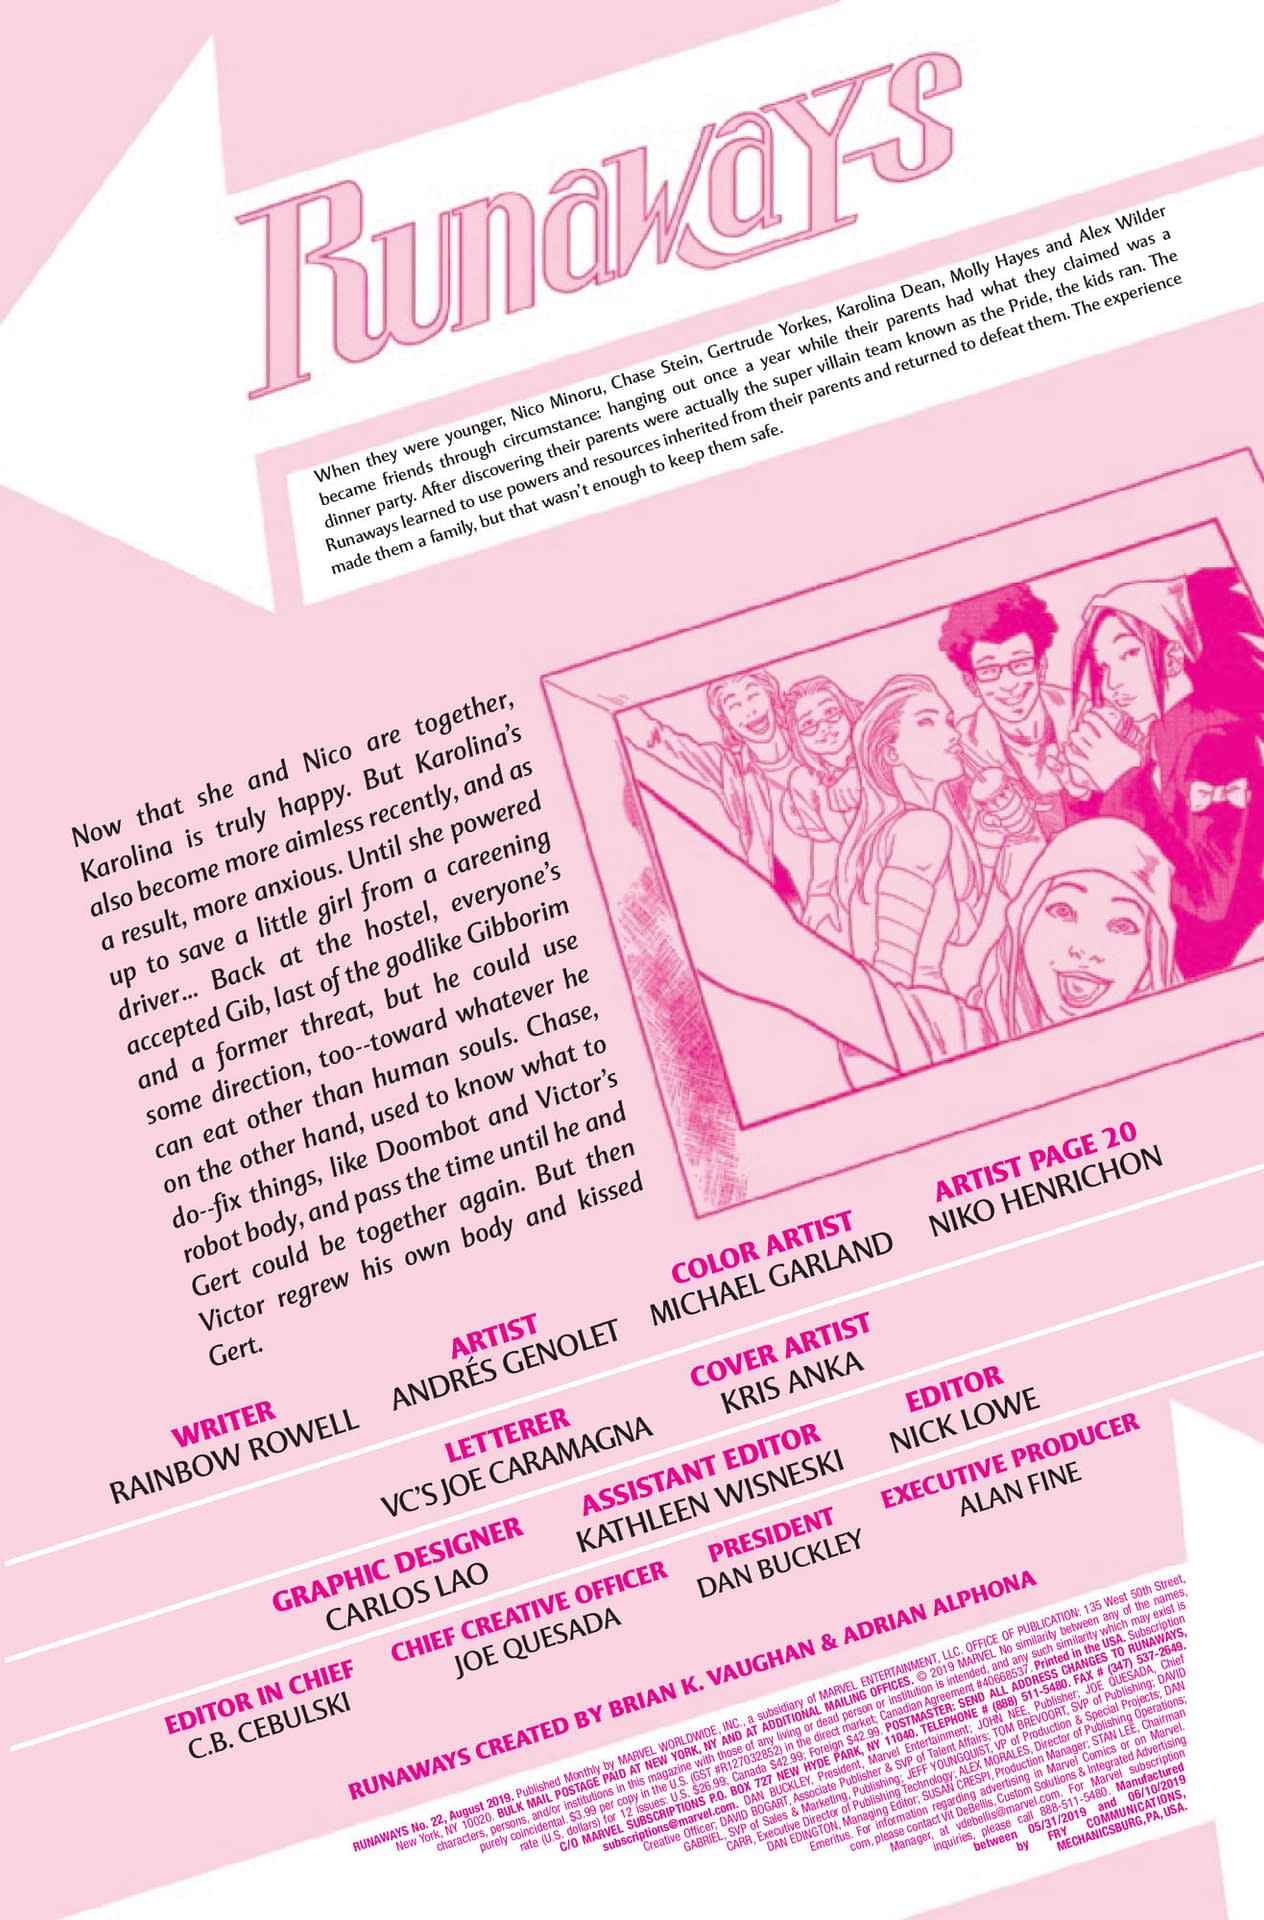 Learning to Human in Runaways #22 (Preview)